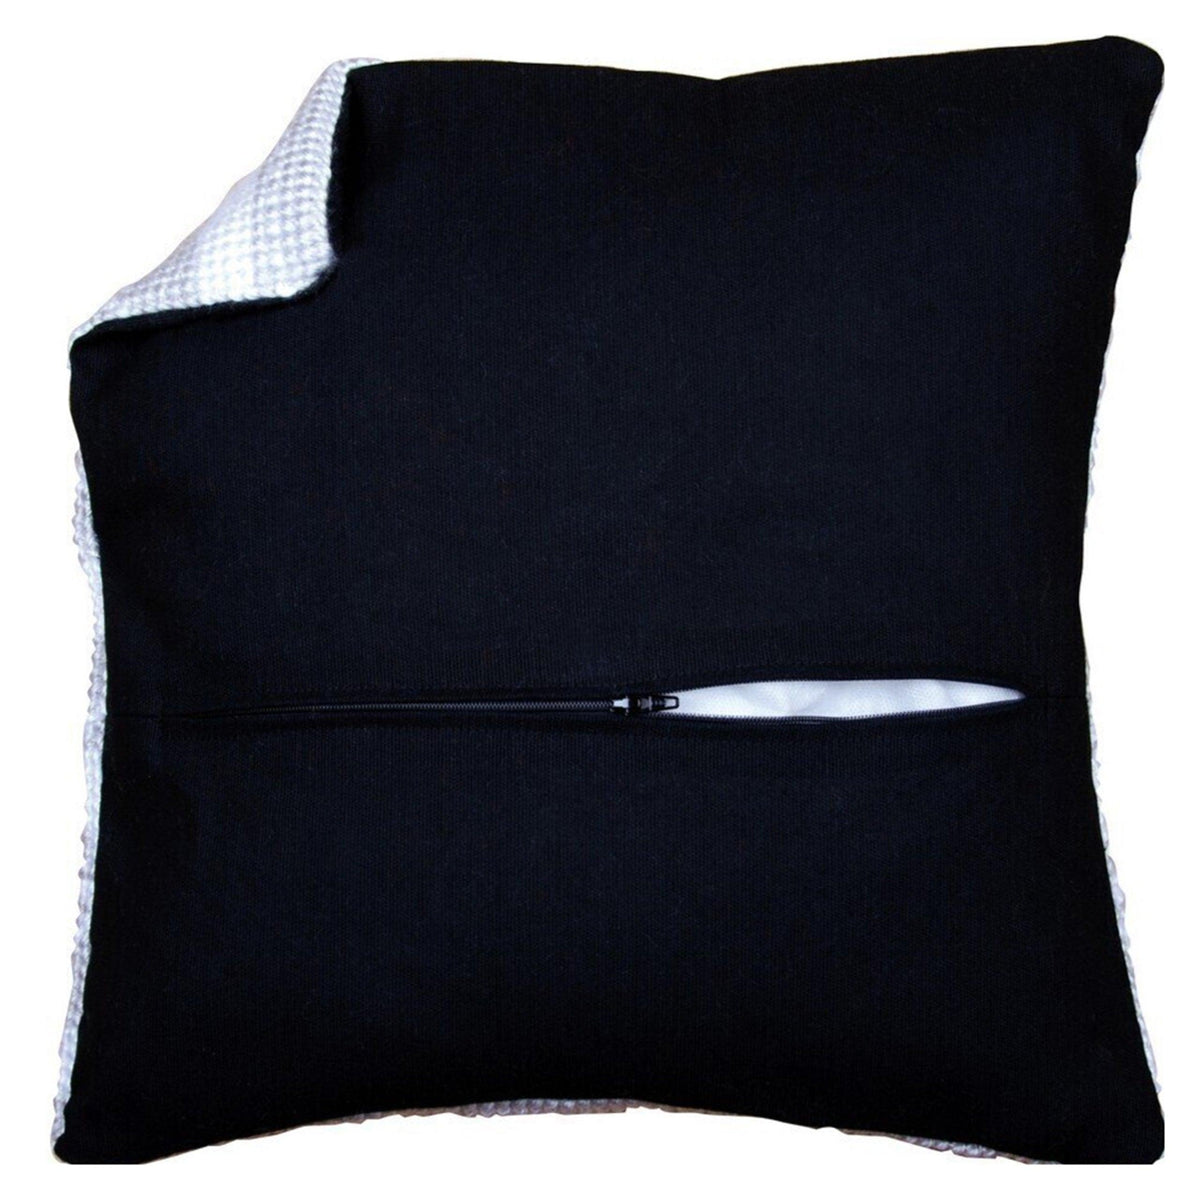 Thea Gouverneur Cushion Back Kit with Zipper - Black - For any 16x16 Inch (40x40cm) Cushion- Cross Stitch Creations - Embroidery - 23.5901 - Thea Gouverneur Since 1959